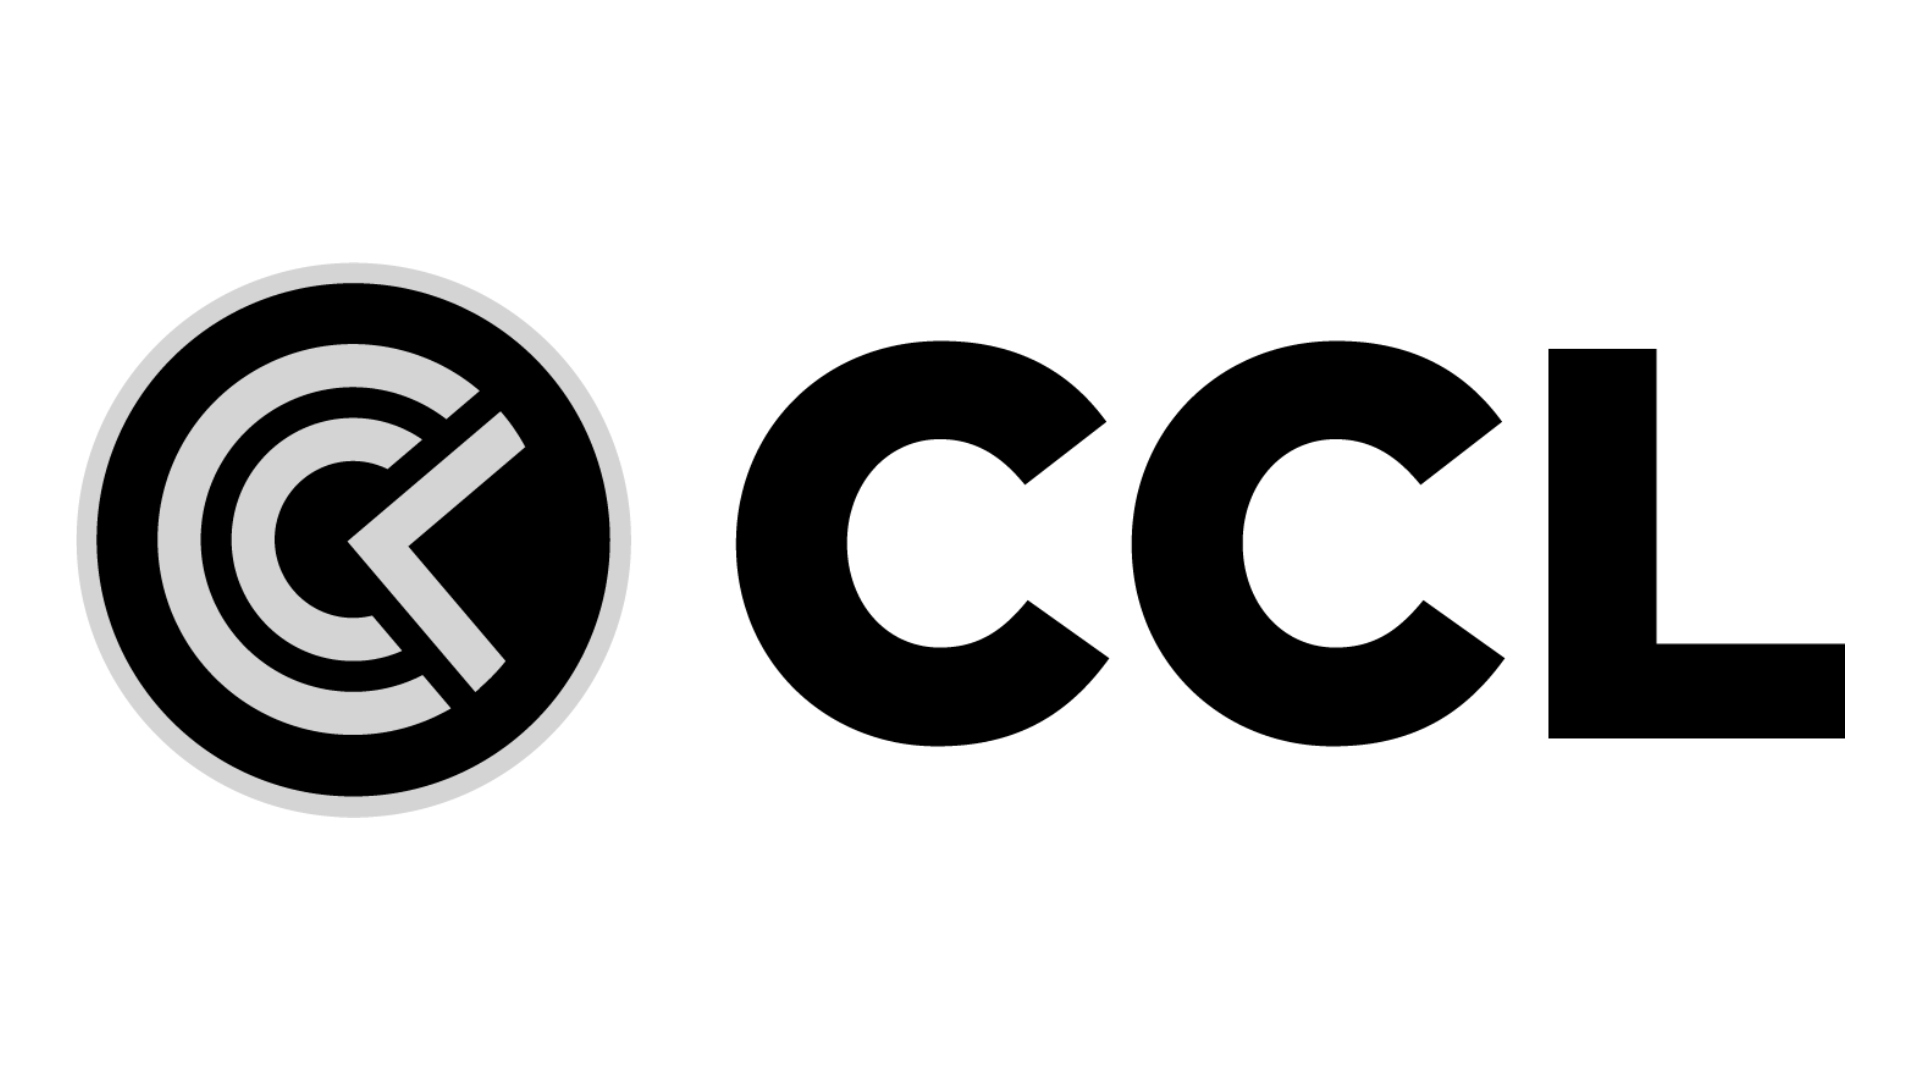 Best websites for custom PC builds, number 7: CCL, their logo stands on a white background.